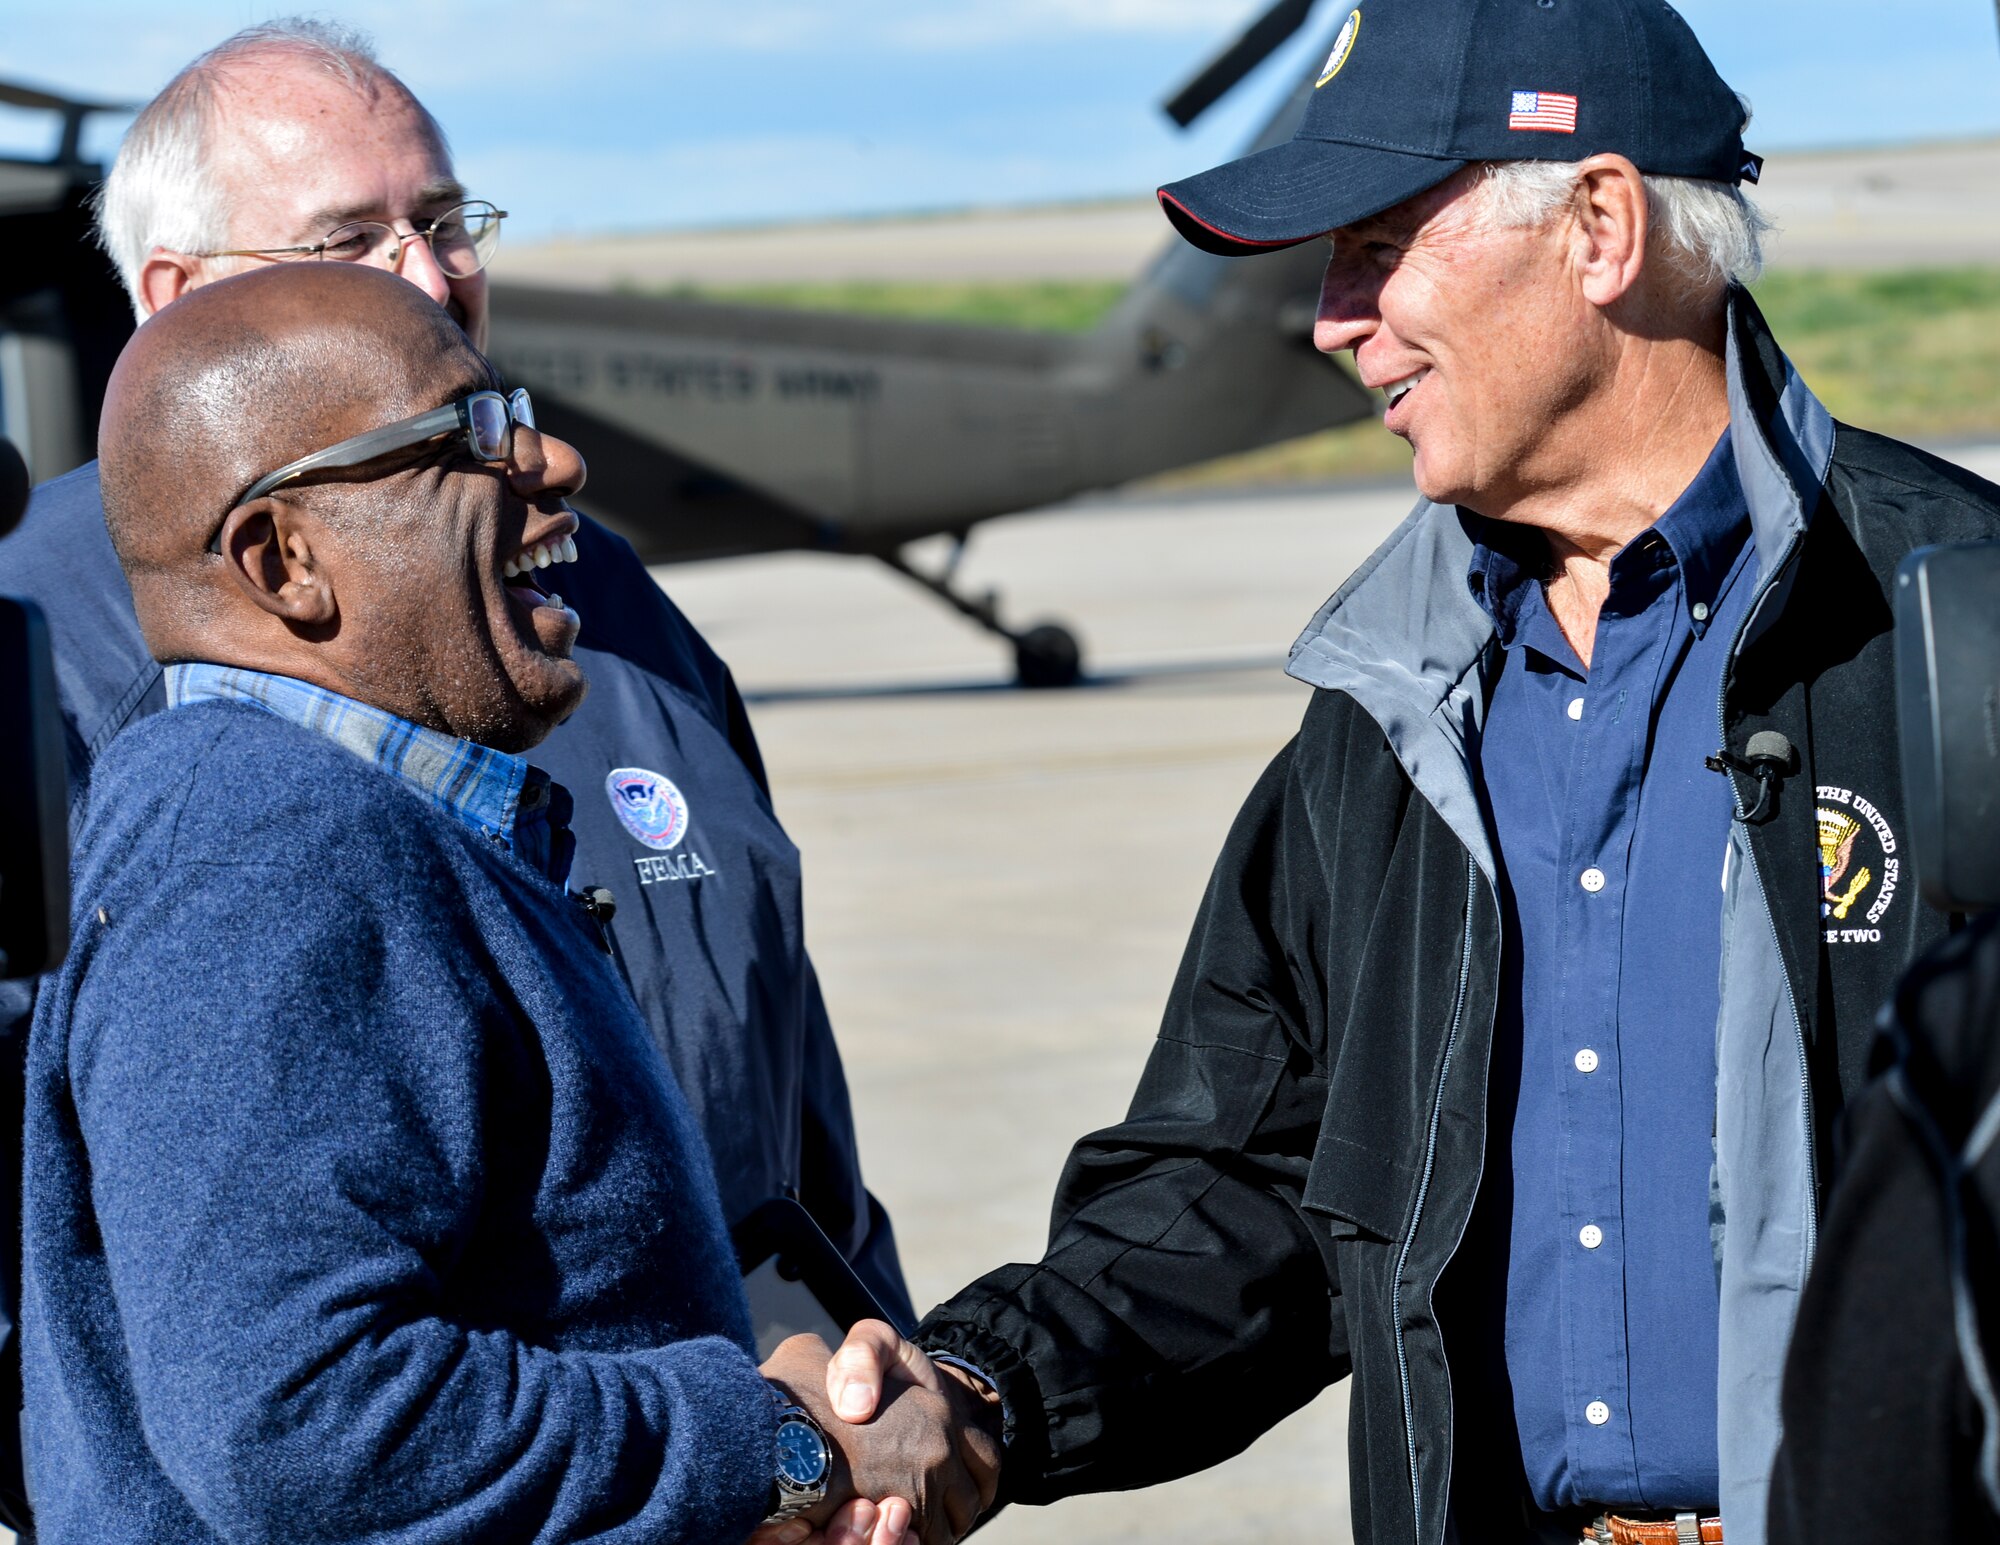 Al Roker, NBC weather forecaster, left, laughs with Vice President Joe Biden Sept. 23, 2013, at Buckley Air Force Base, Colo. Biden and various new affiliates visited Colorado to view the damage and survey recovery efforts after the flooding that killed at least eight people and ravaged at least 14 counties. (U.S. Air Force photo by Airman 1st Class Riley Johnson/Released)